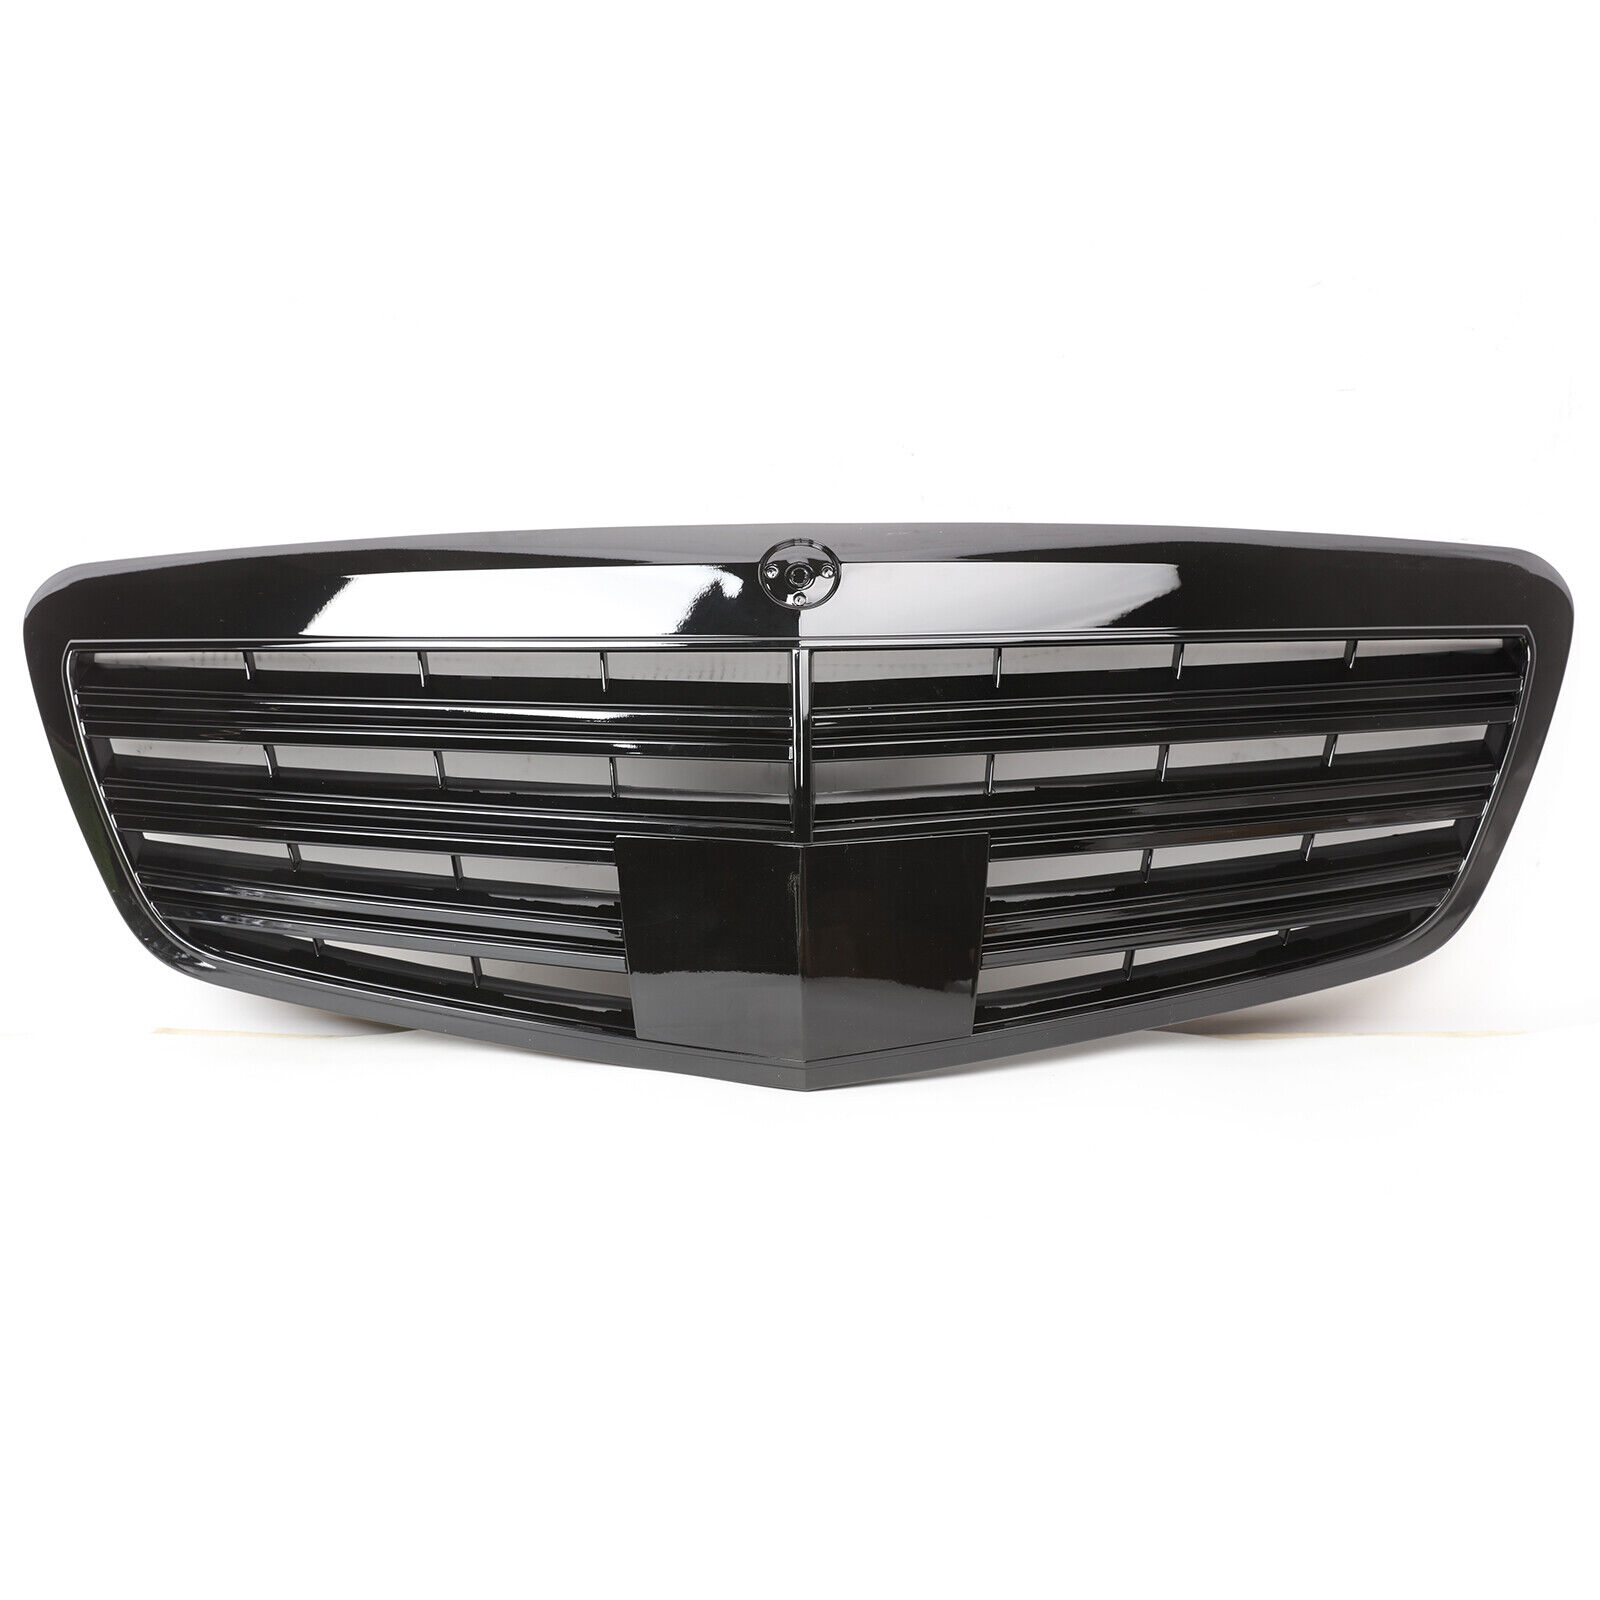 Gloss Black AMG style Front Grille Grill for Mercedes Benz S-Class W221 2010-13